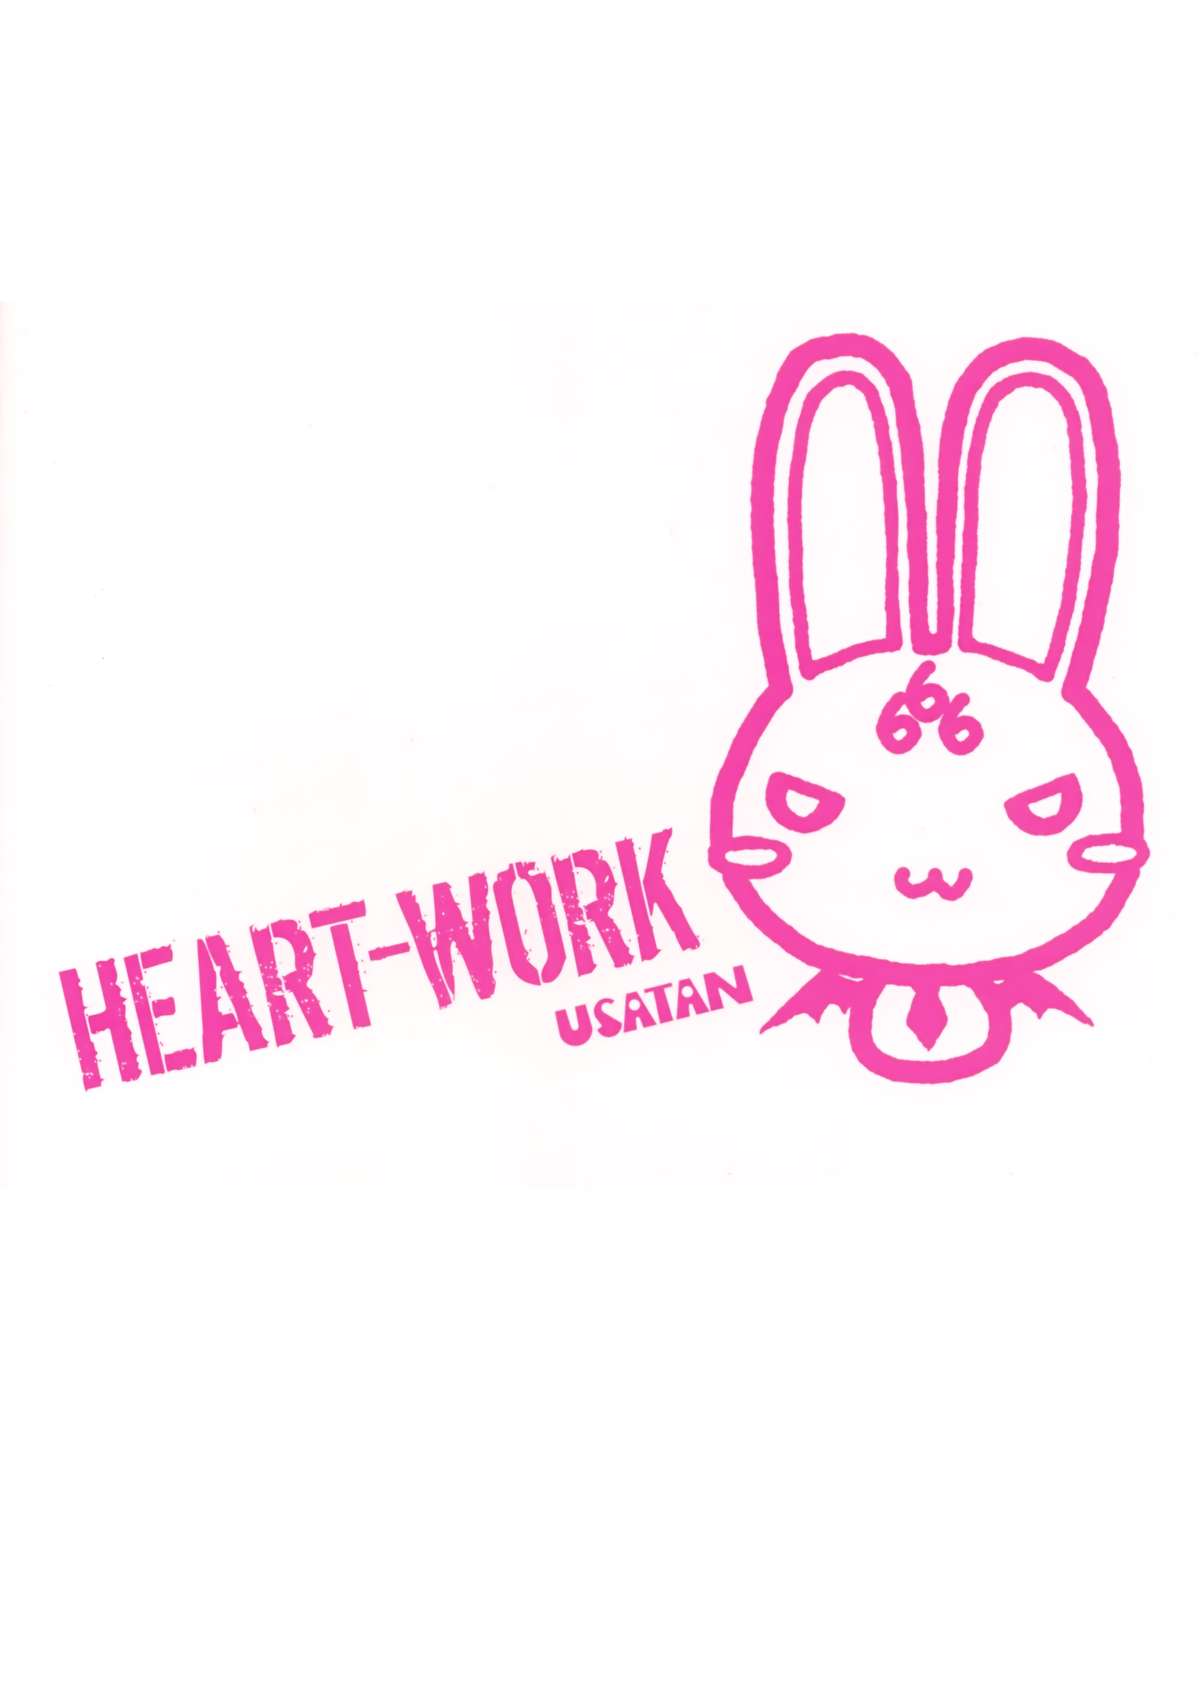 (C83) [HEART WORK (鈴平ひろ)] Waiting for you - HEART-WORK 2012.12.29 (よろず)